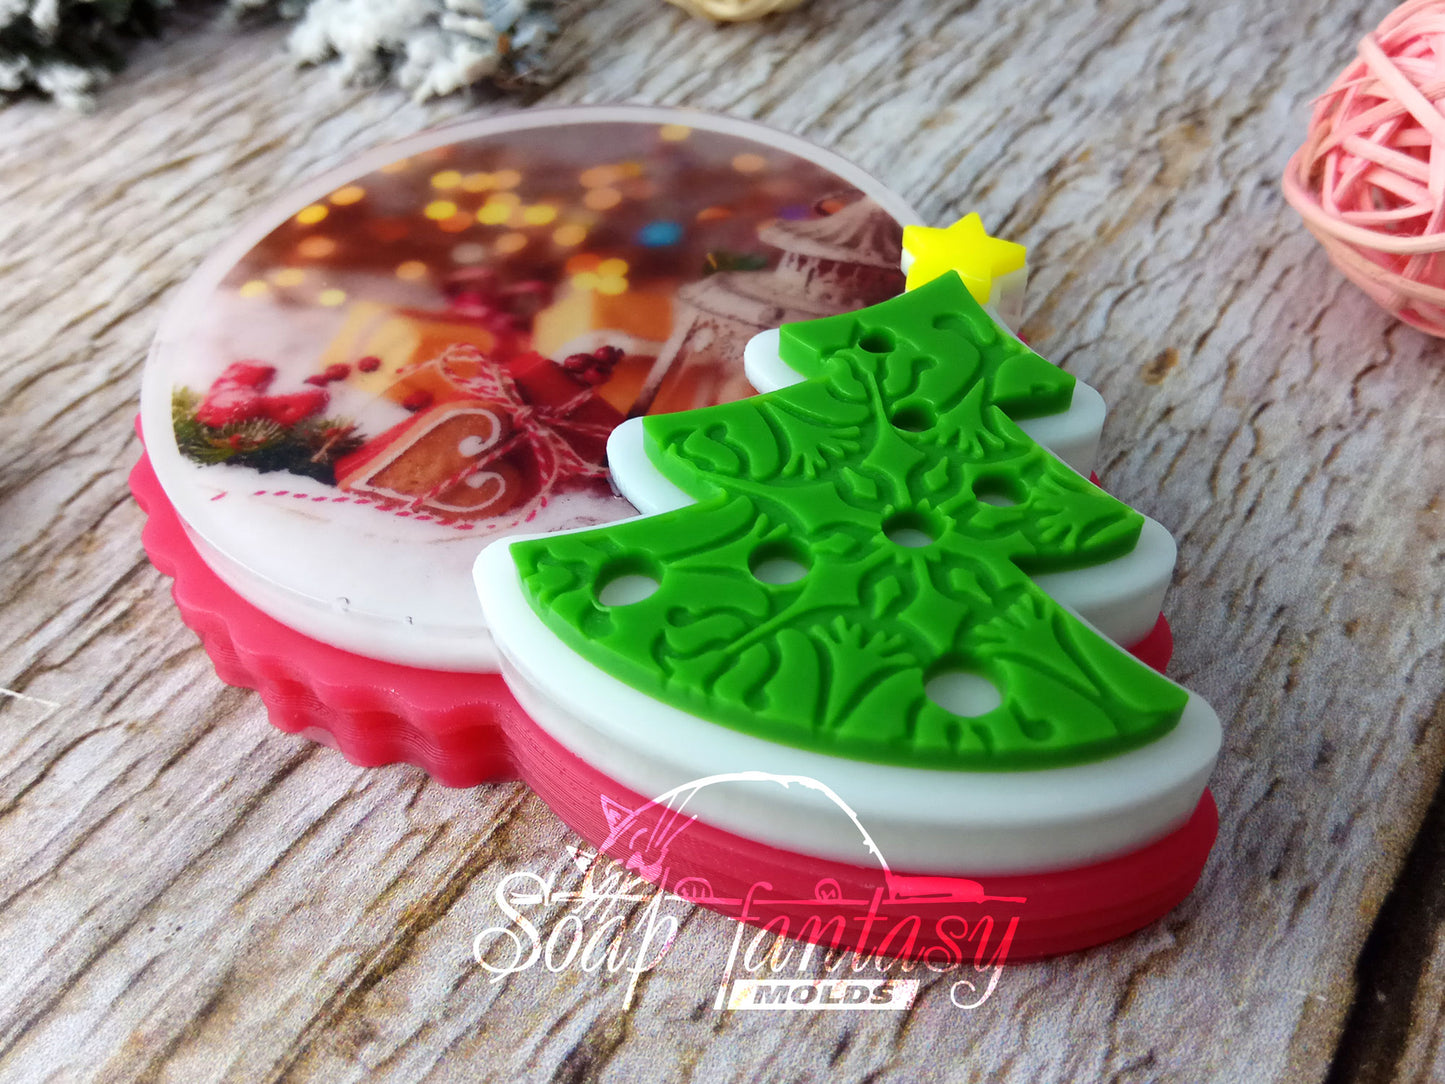 New Year spirit (model 3) silicone mold for making soap with a picture